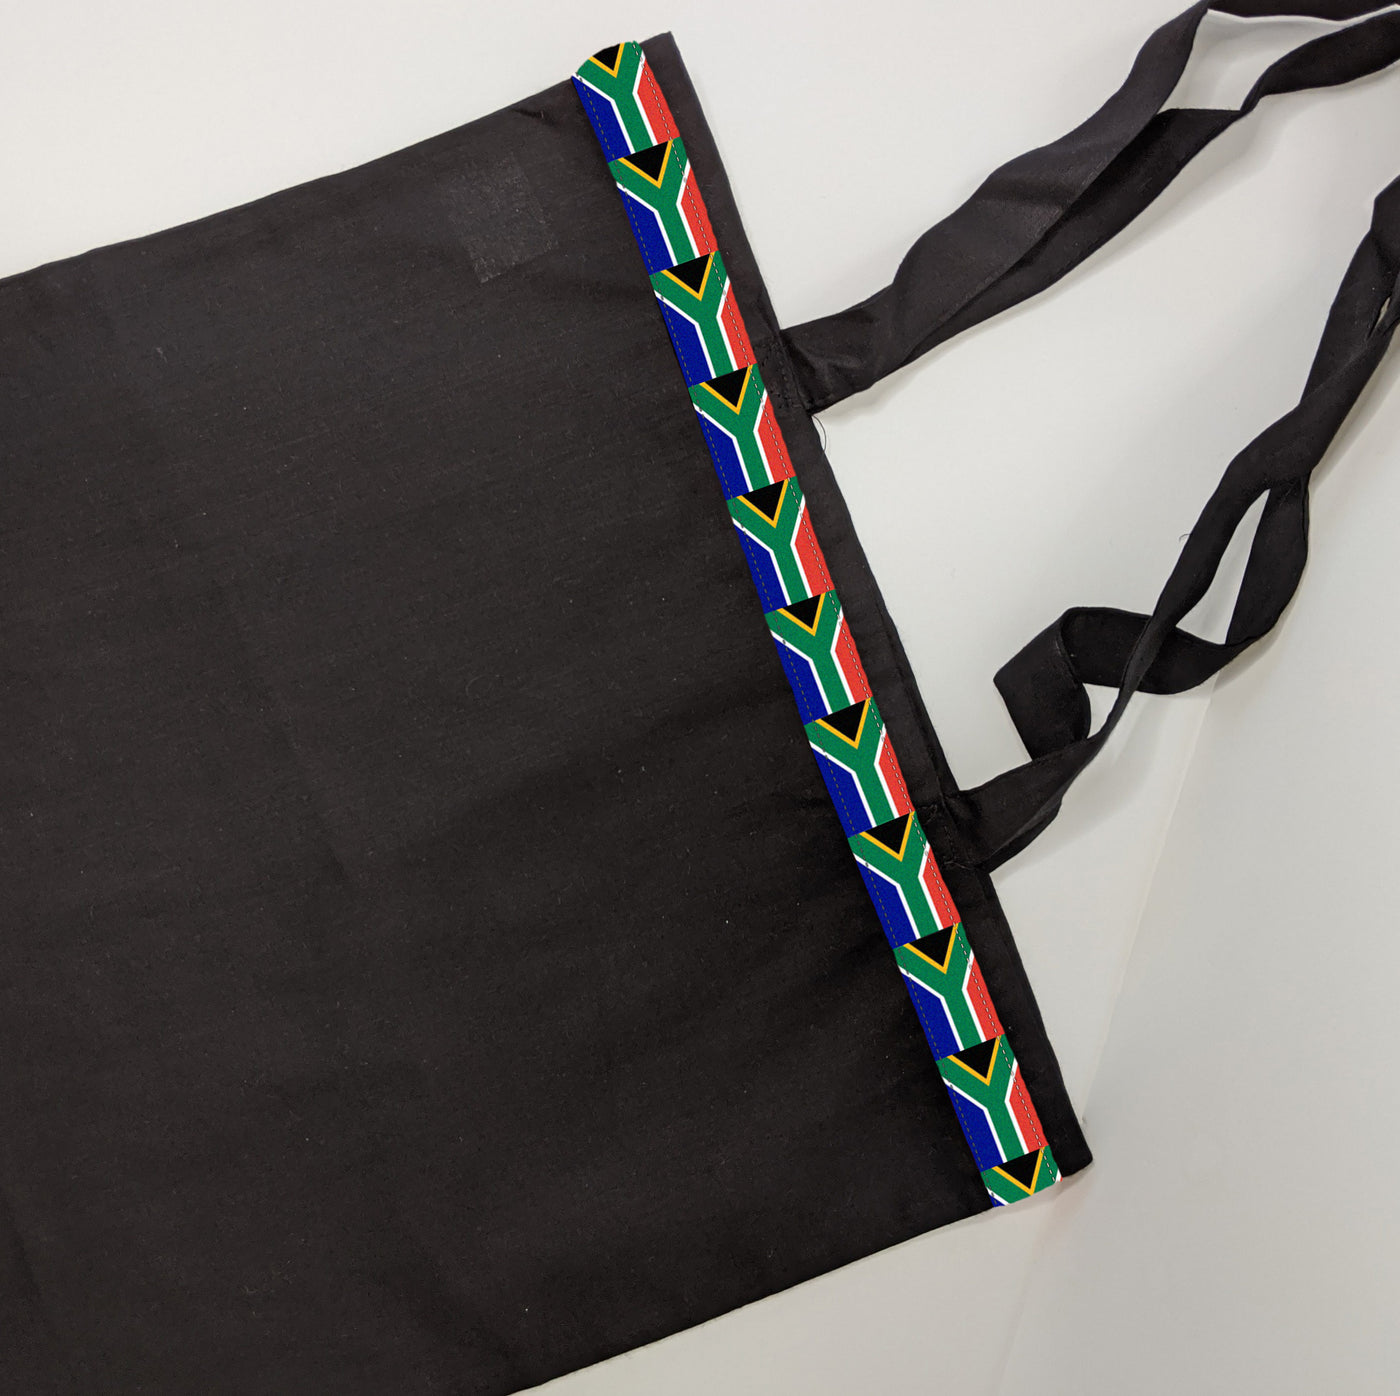 Black tote bag with South Africa flag detail